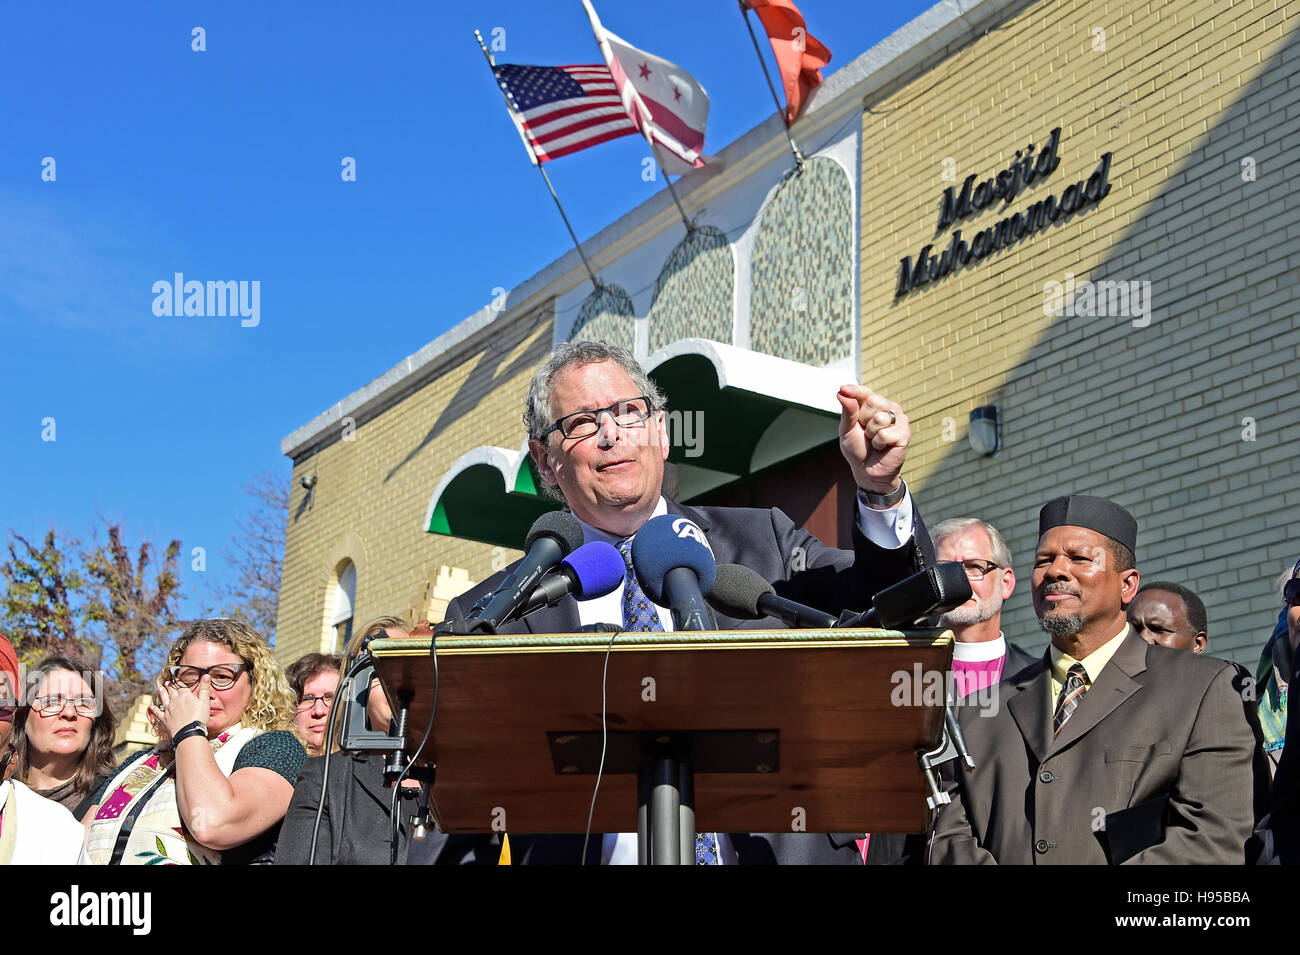 Washington, Us. 18th Nov, 2016. Rabbi Jack Moline, (pictured) President of Interfaith Alliance, speaks at a press conference calling on President-elect Donald Trump to respect religious liberty. In the aftermath of the election and in response to the rising hate crimes against Muslims, national Christian and Jewish leaders joined their Muslim colleagues at Masjid Muhammad in Washington, DC on Friday, November 18, 2016 for the daily Muslim prayer service. Credit: Ron Sachs/CNP - NO WIRE SERVICE - Credit:  dpa/Alamy Live News Stock Photo